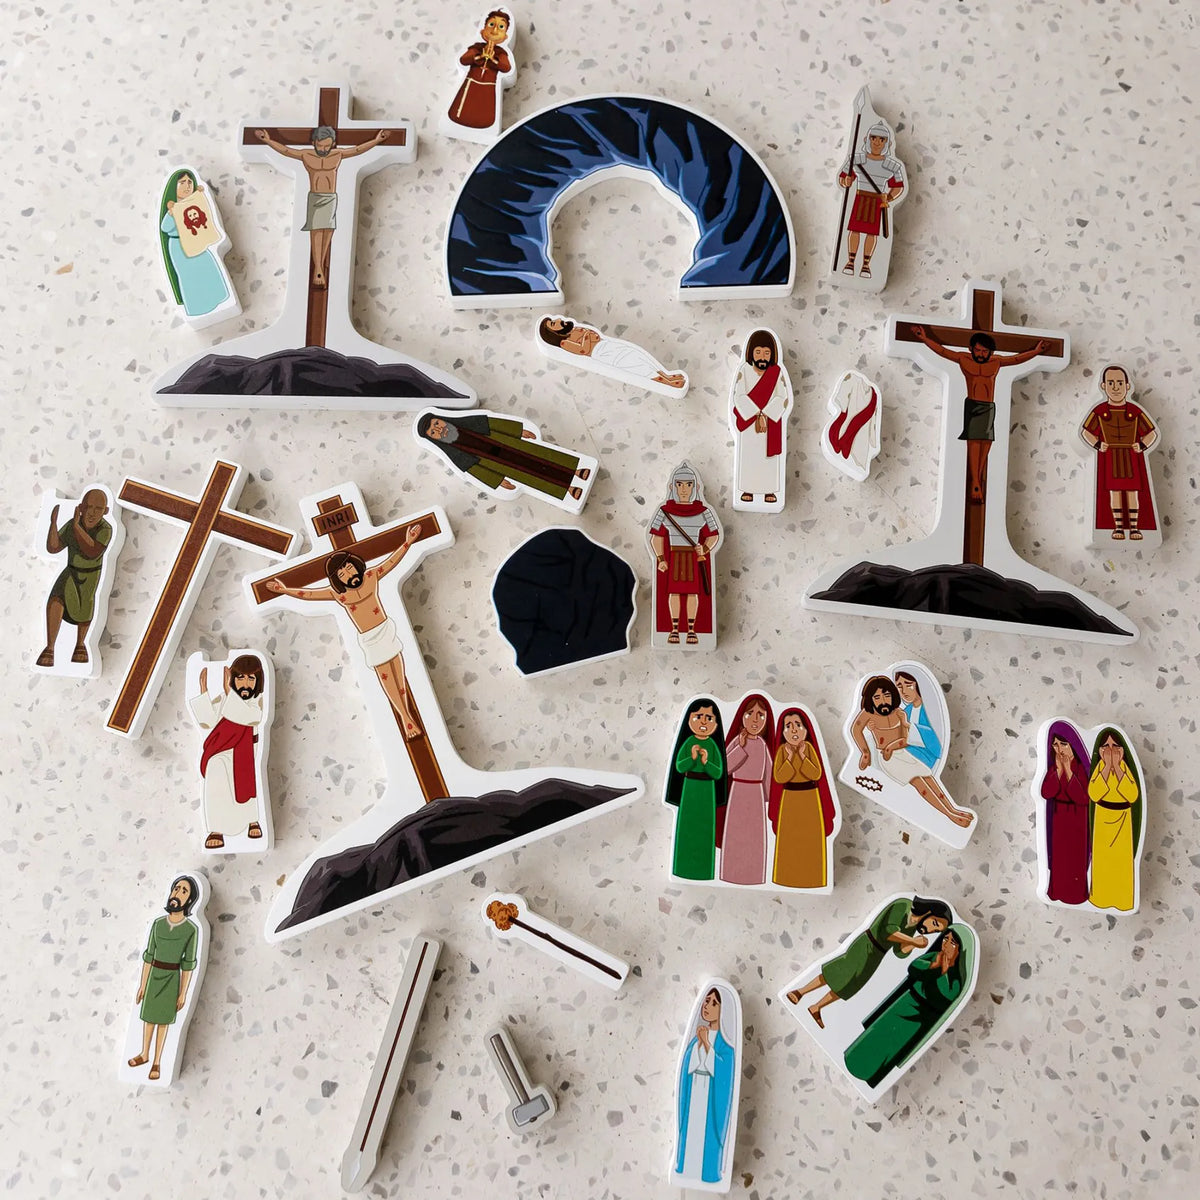 The Stations of the Cross Pray and Play Set